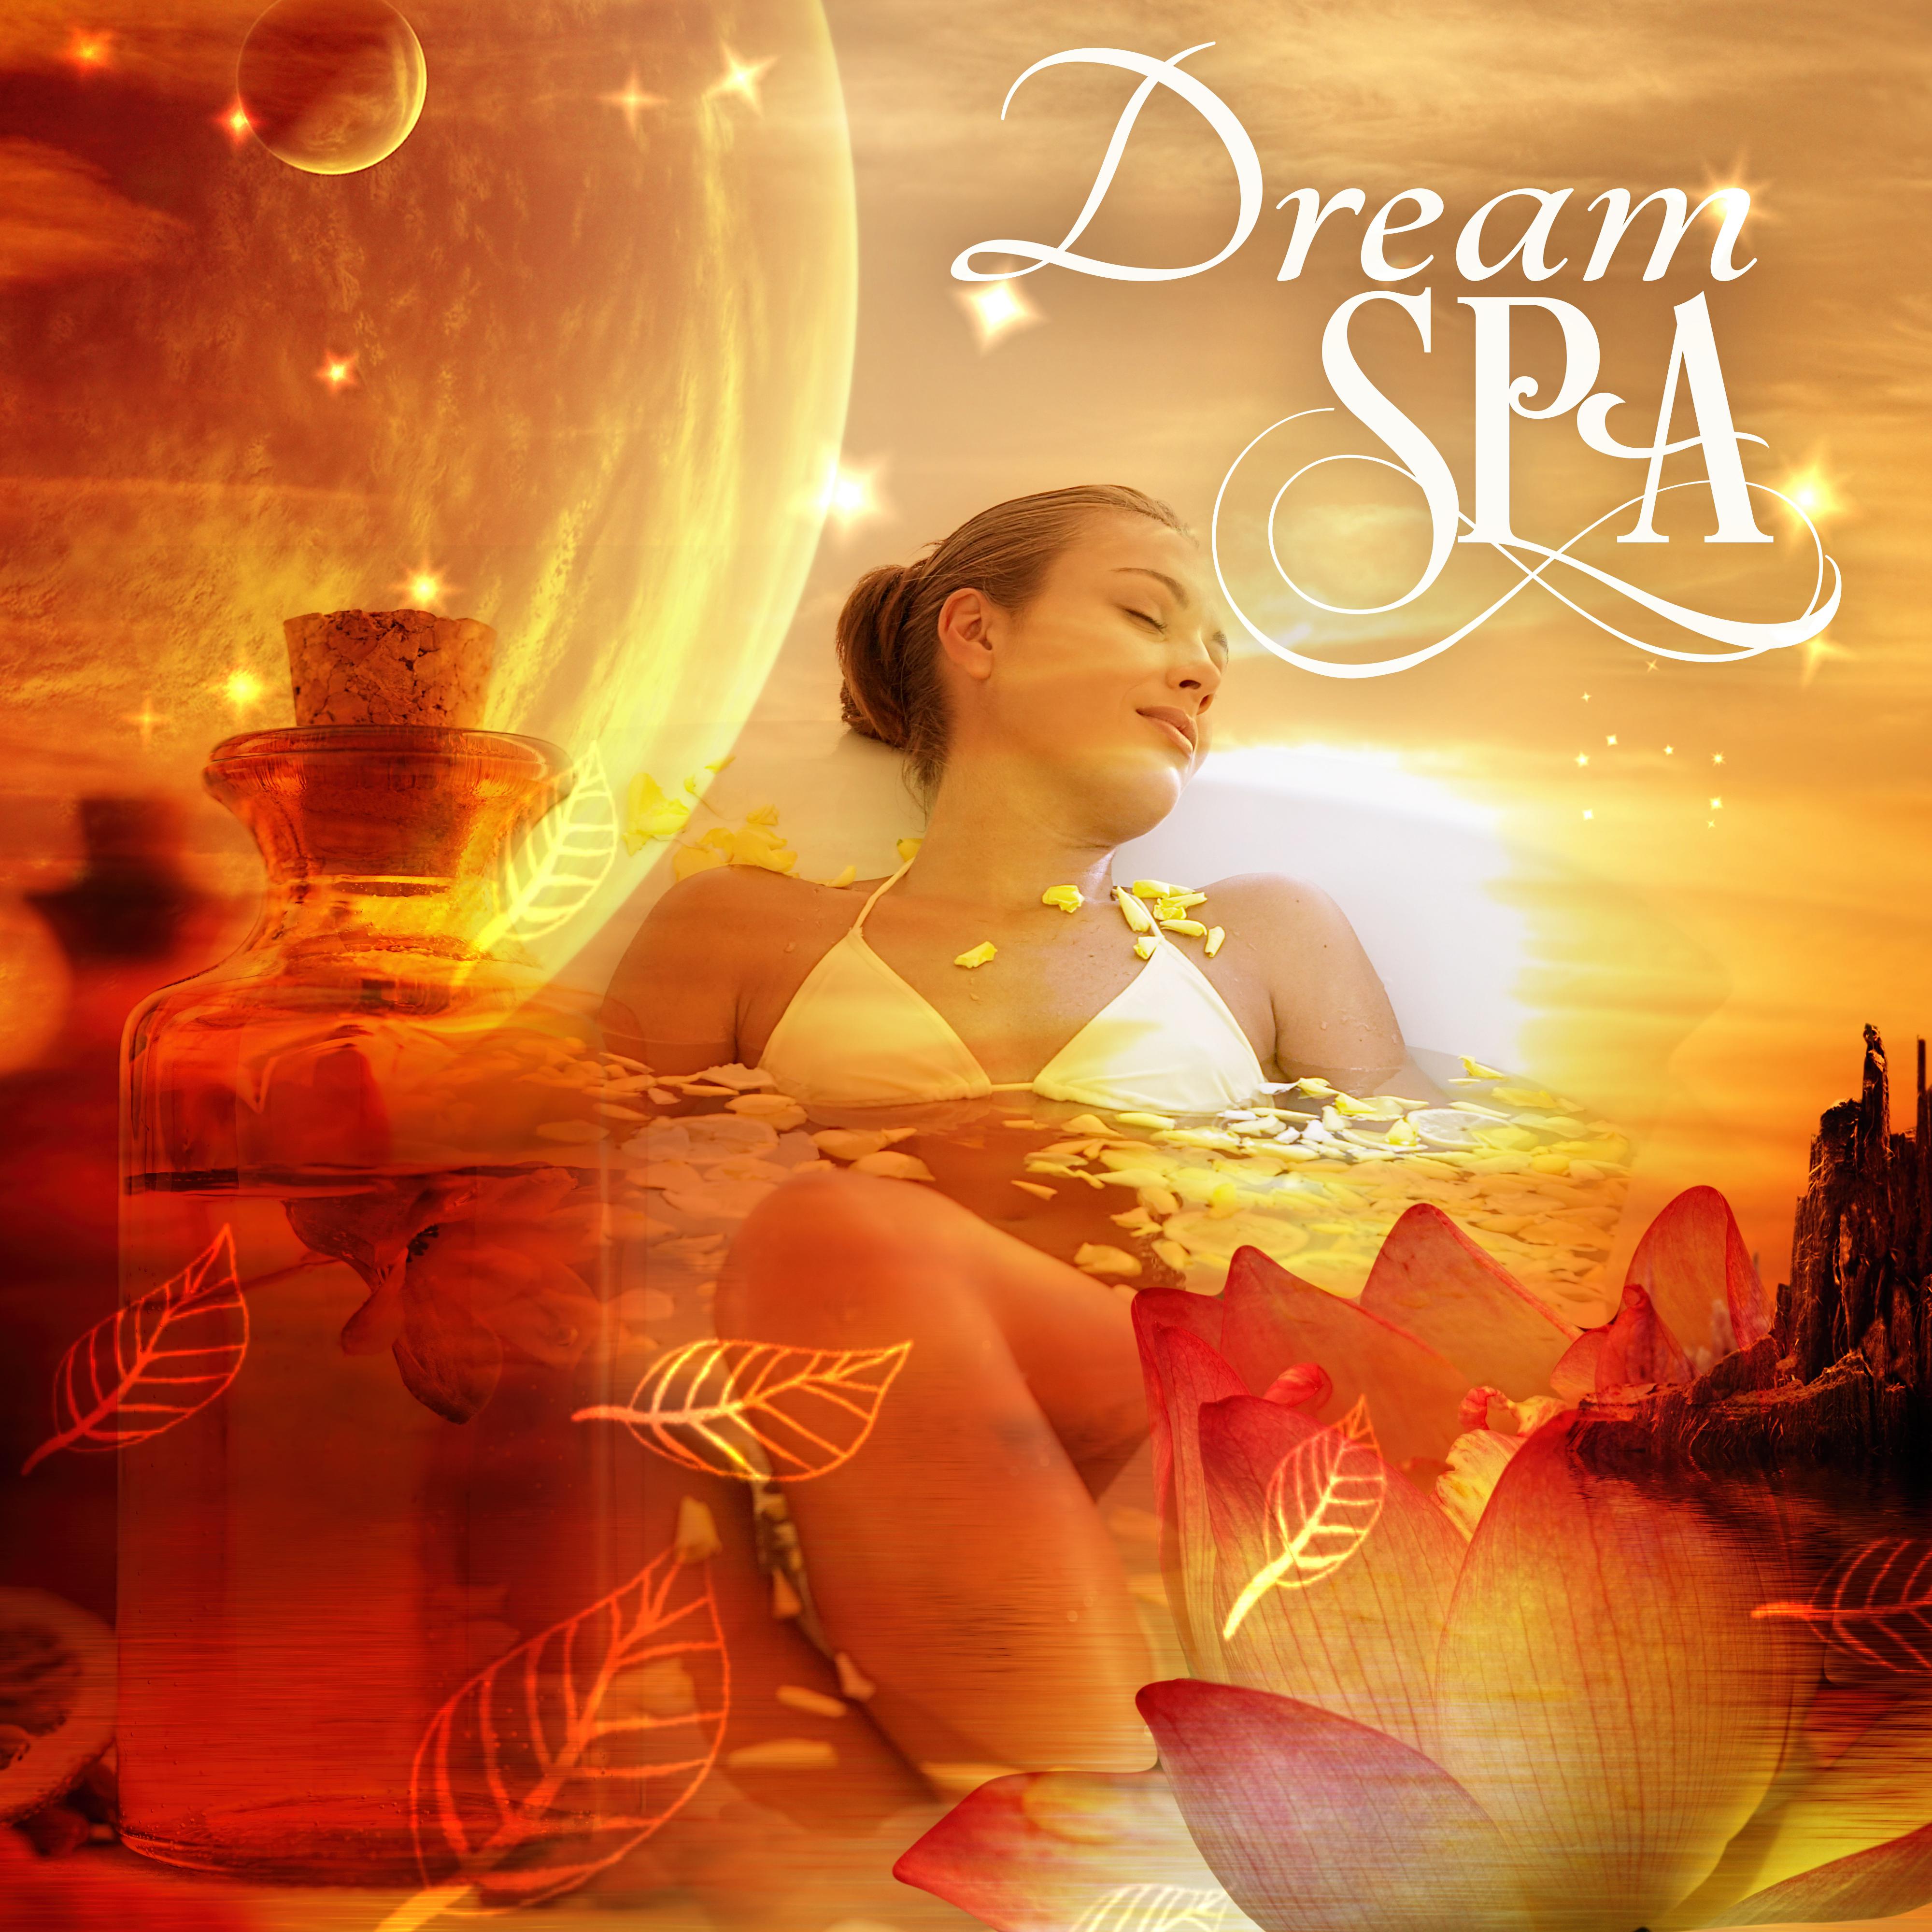 Dream Spa - Ultimate Spa Music Collection, Sounds of Nature, Meditation & Relaxation Music, Background Music for Spa Treatments, Wellness Spa & Beautiful Women, Massage